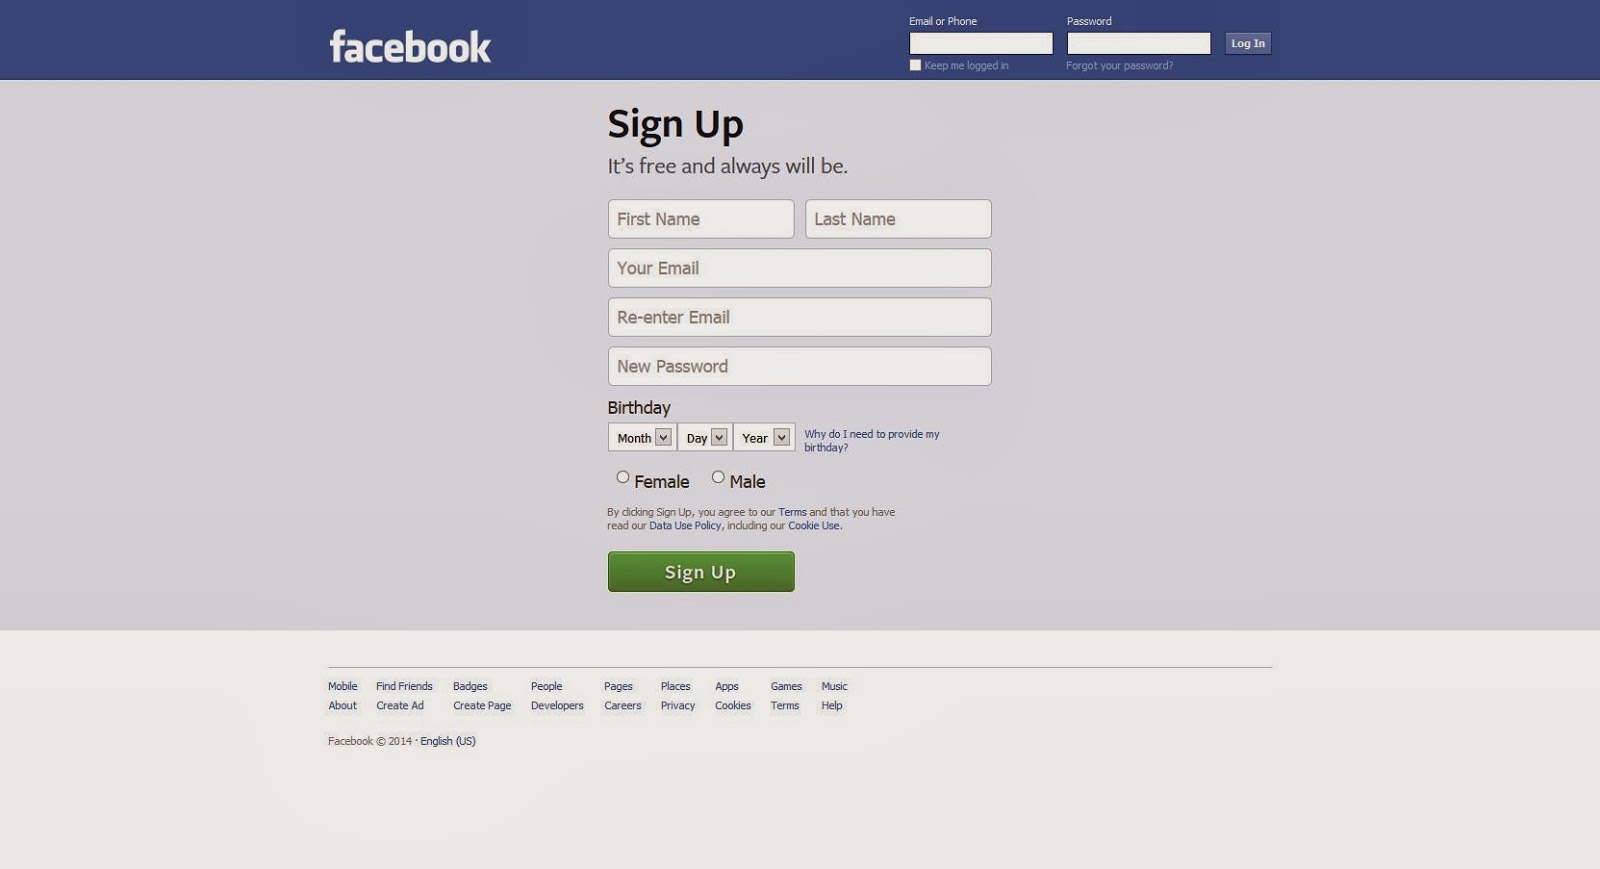 Or up learn to welcome facebook more sign [Mozilla Firefox]:[Welcome